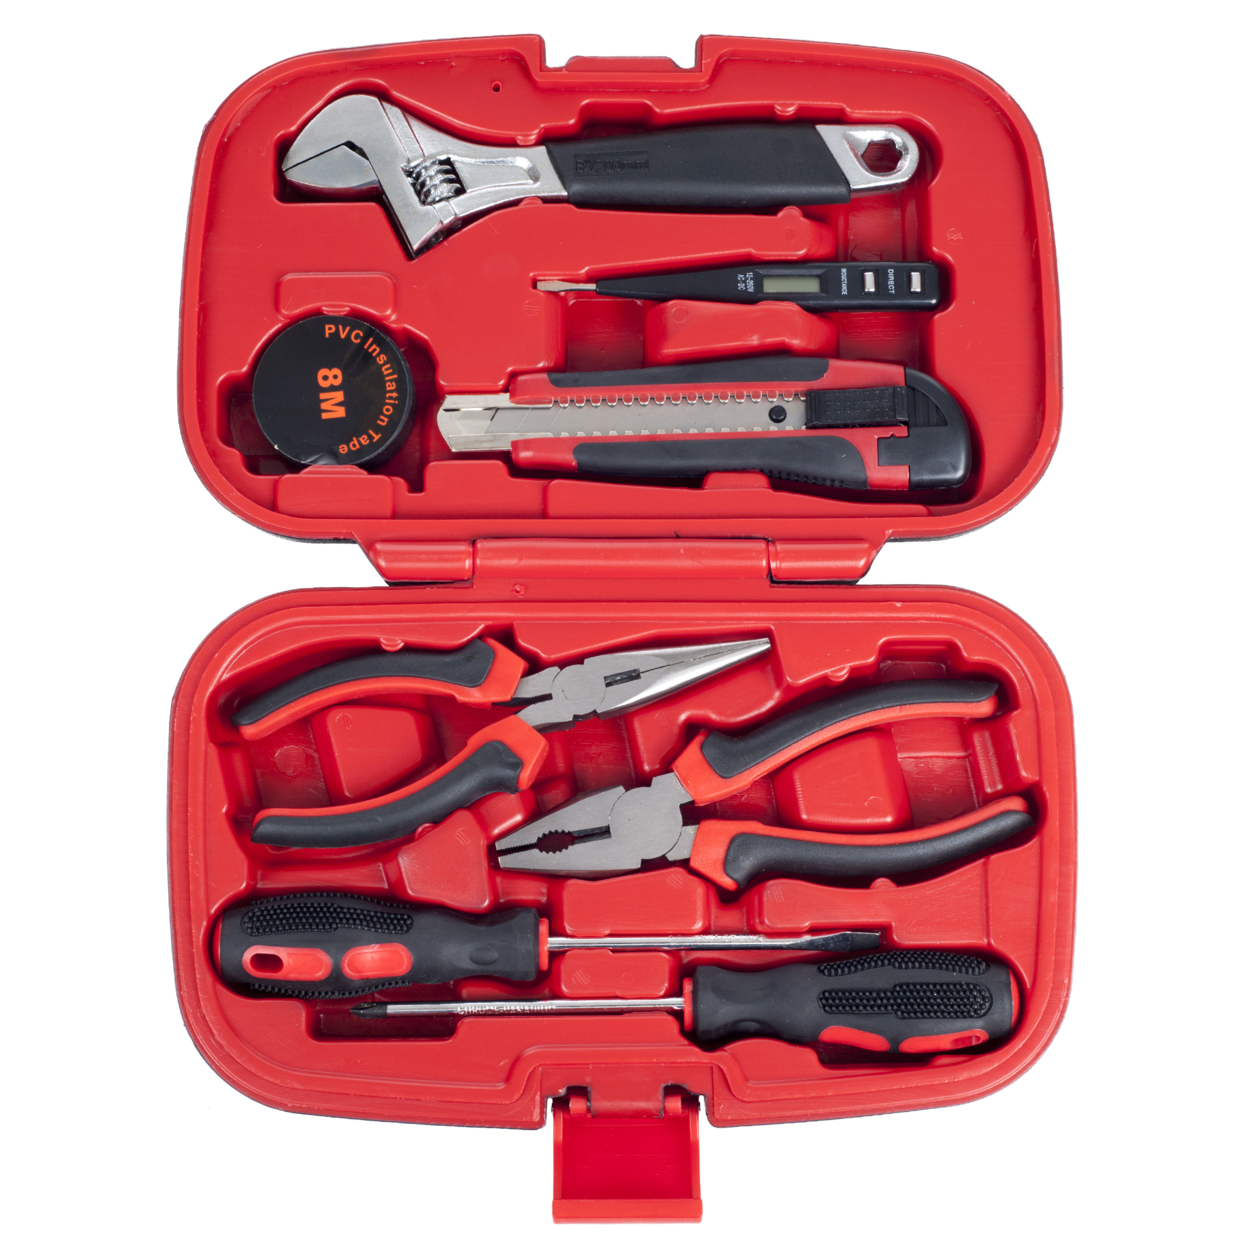 Household Hand Tools, Tool Set - 15 Piece Set Includes – Hammer, Wrench, Screwdriver, Pliers (Tool Kit For The Home, Office, Or Car)